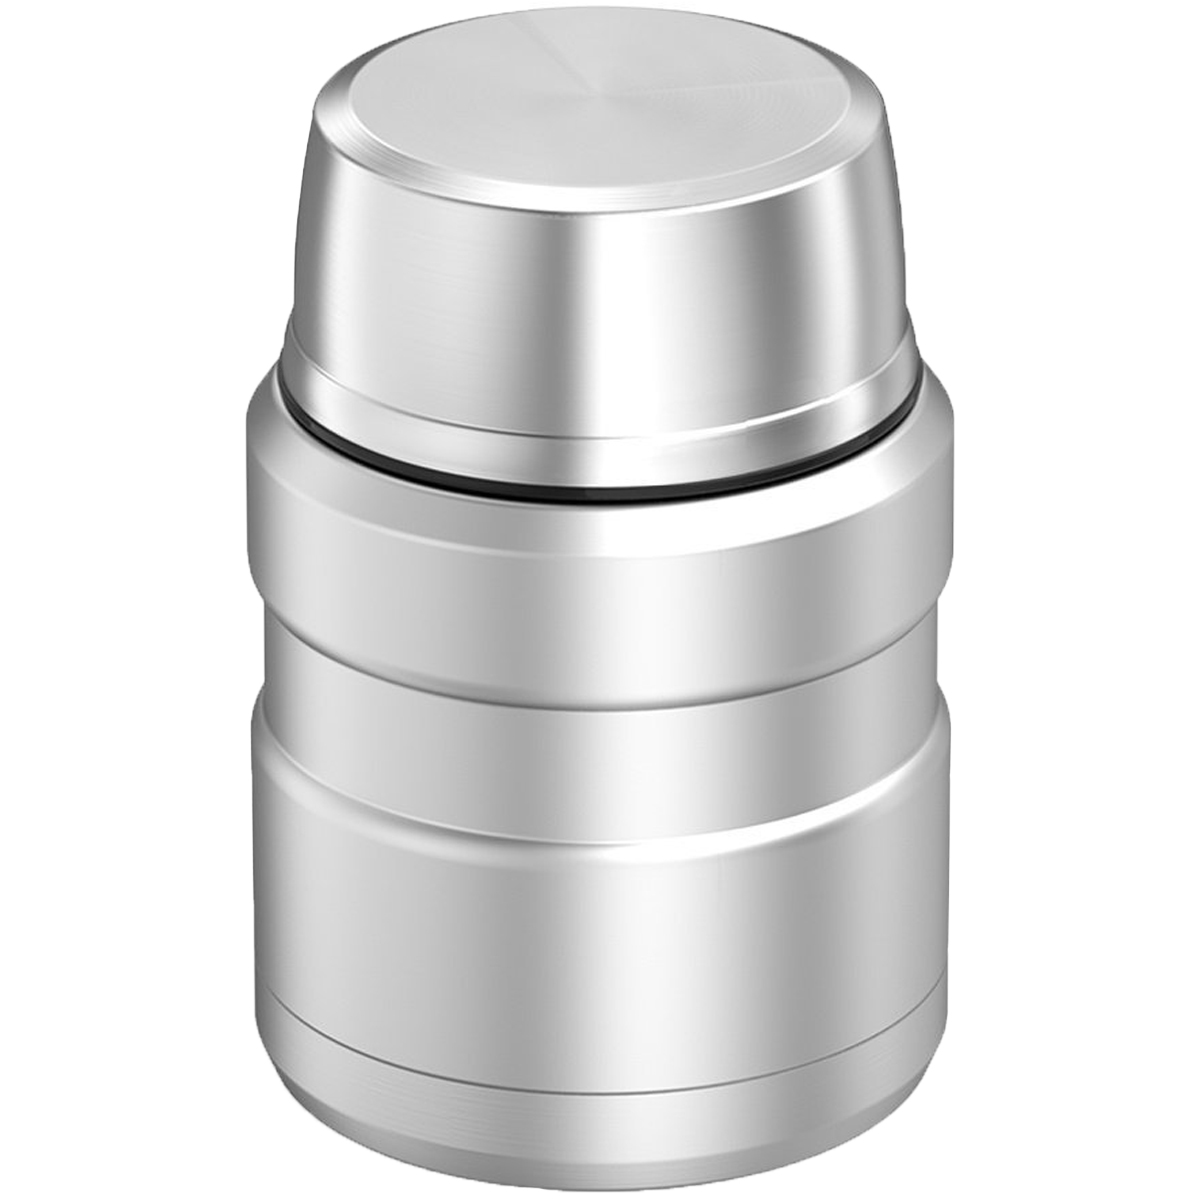 Thermos Stainless King 16 Ounce Food Jar with Folding Spoon, Matte Stainless - image 4 of 5